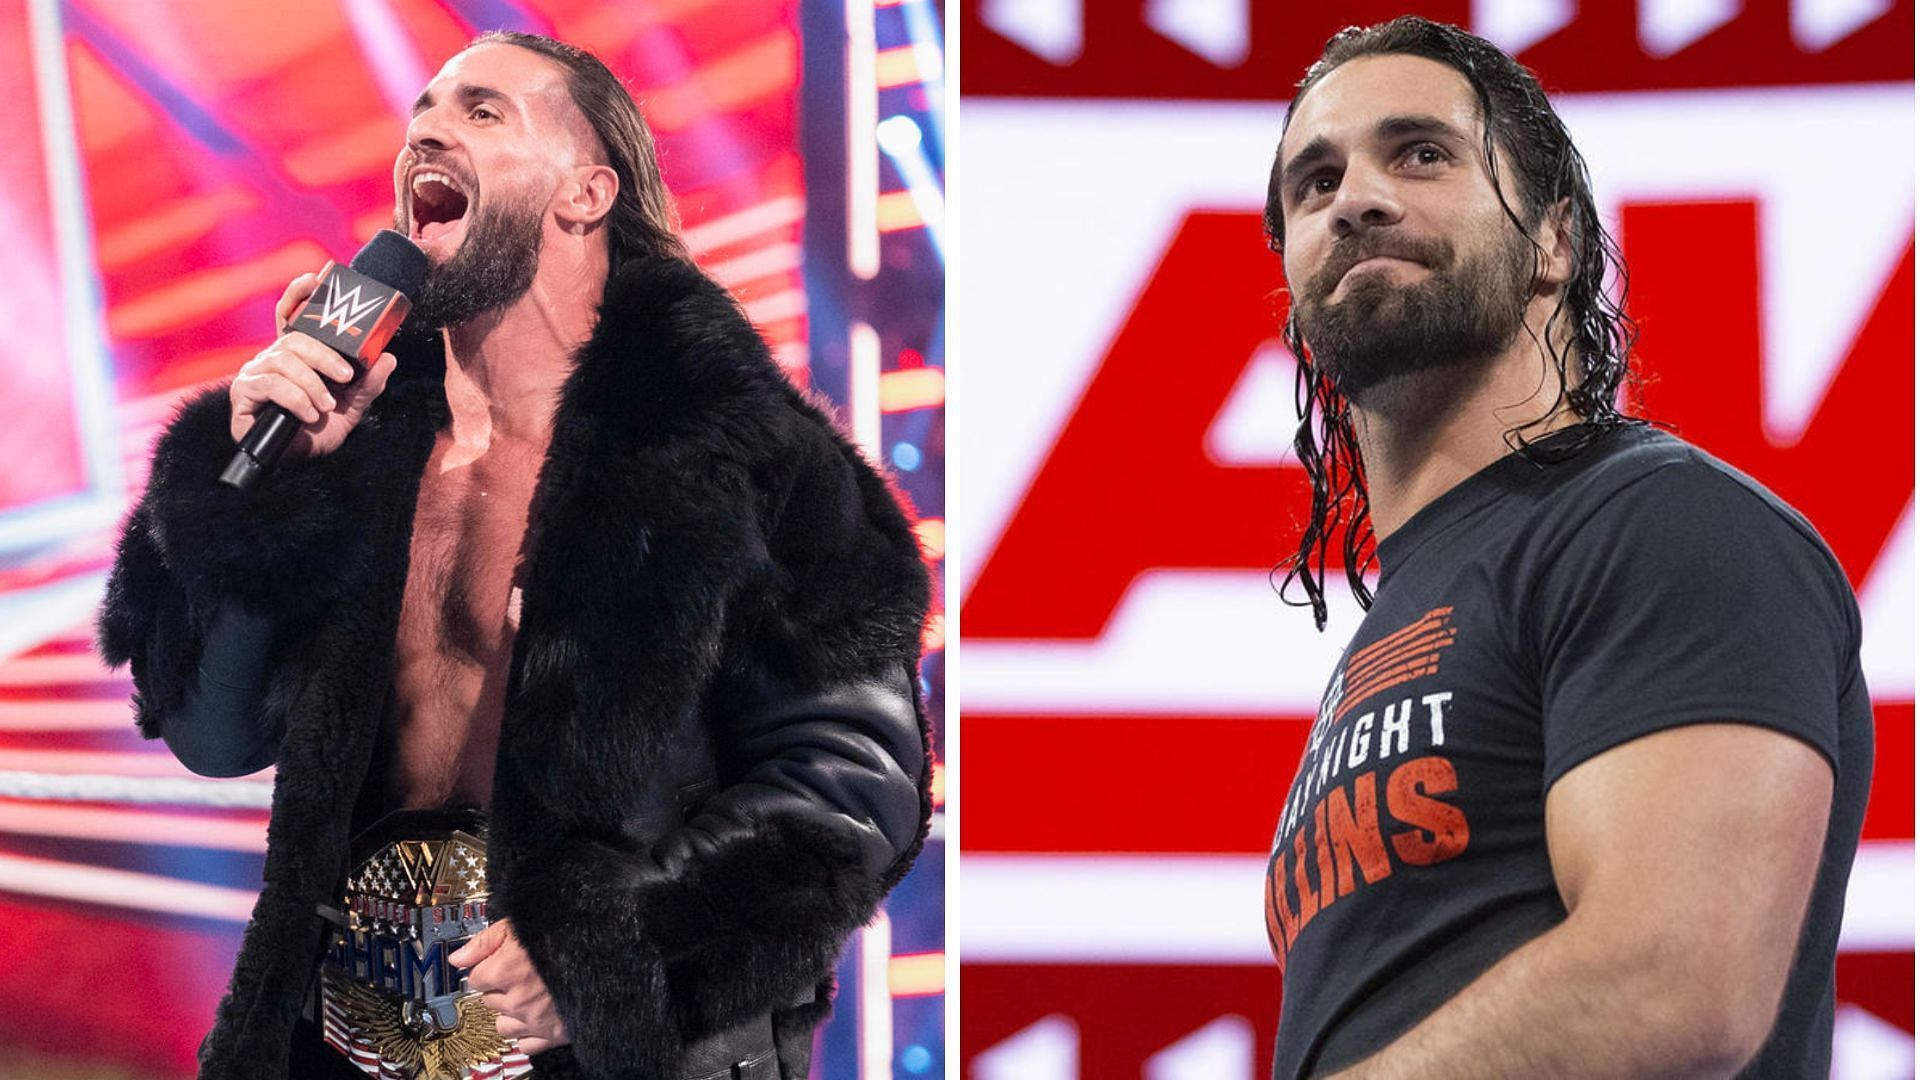 United States Champion Seth Rollins is set to be in-action tomorrow night on WWE RAW.